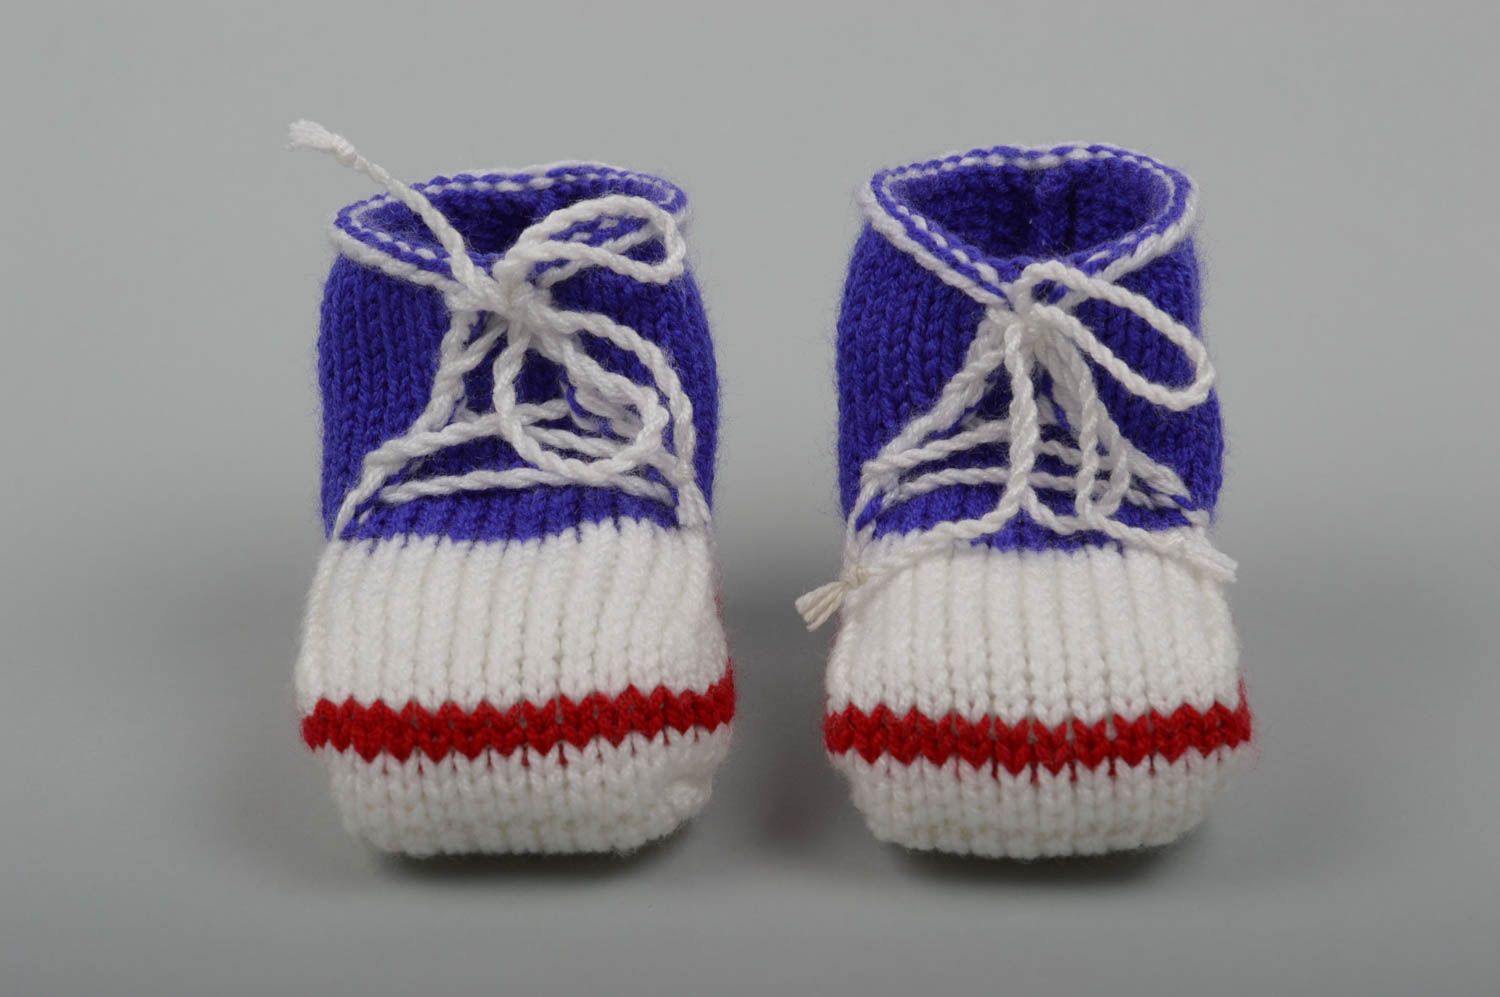 Handmade babies shoes designer clothes for children stylish baby booties photo 3